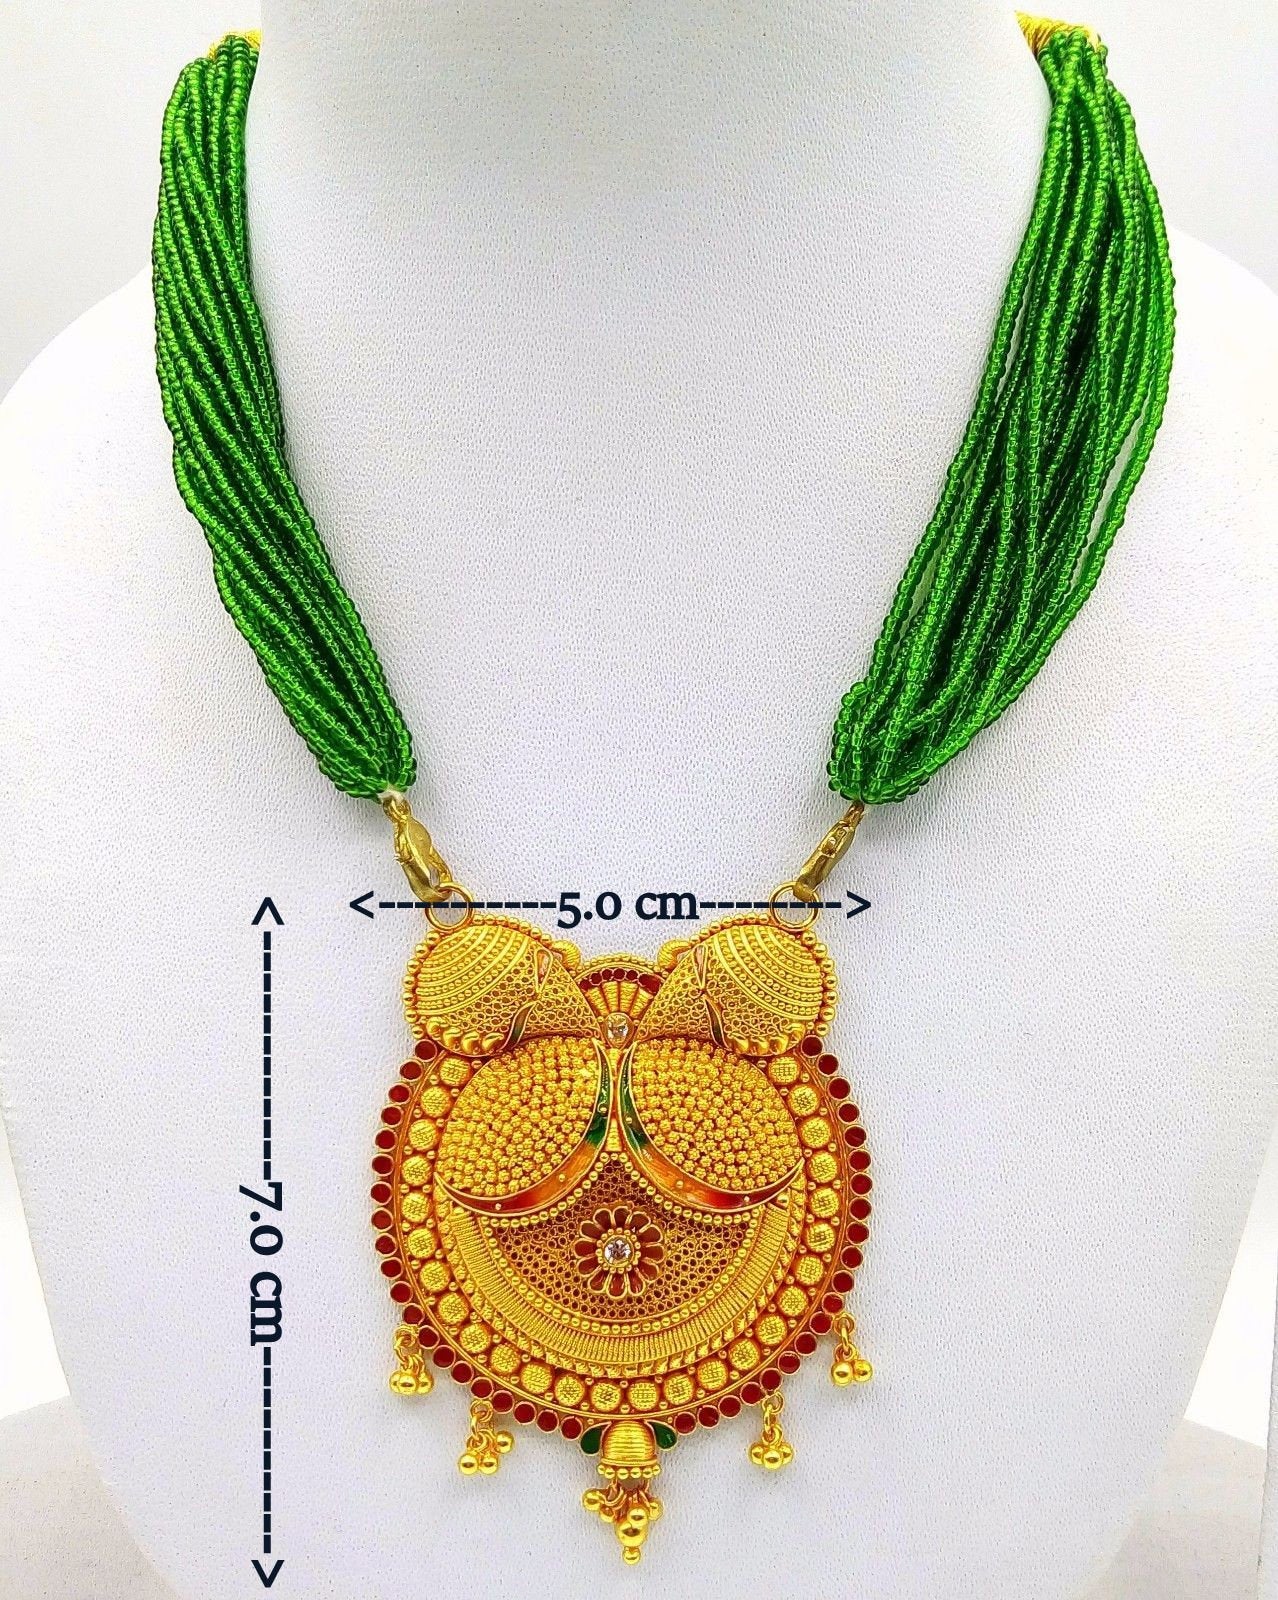 Vintage antique handmade 22k yellow gold filigree work fabulous pendant necklace with awesome meenakari (color enamel ) design mangalsutra - TRIBAL ORNAMENTS